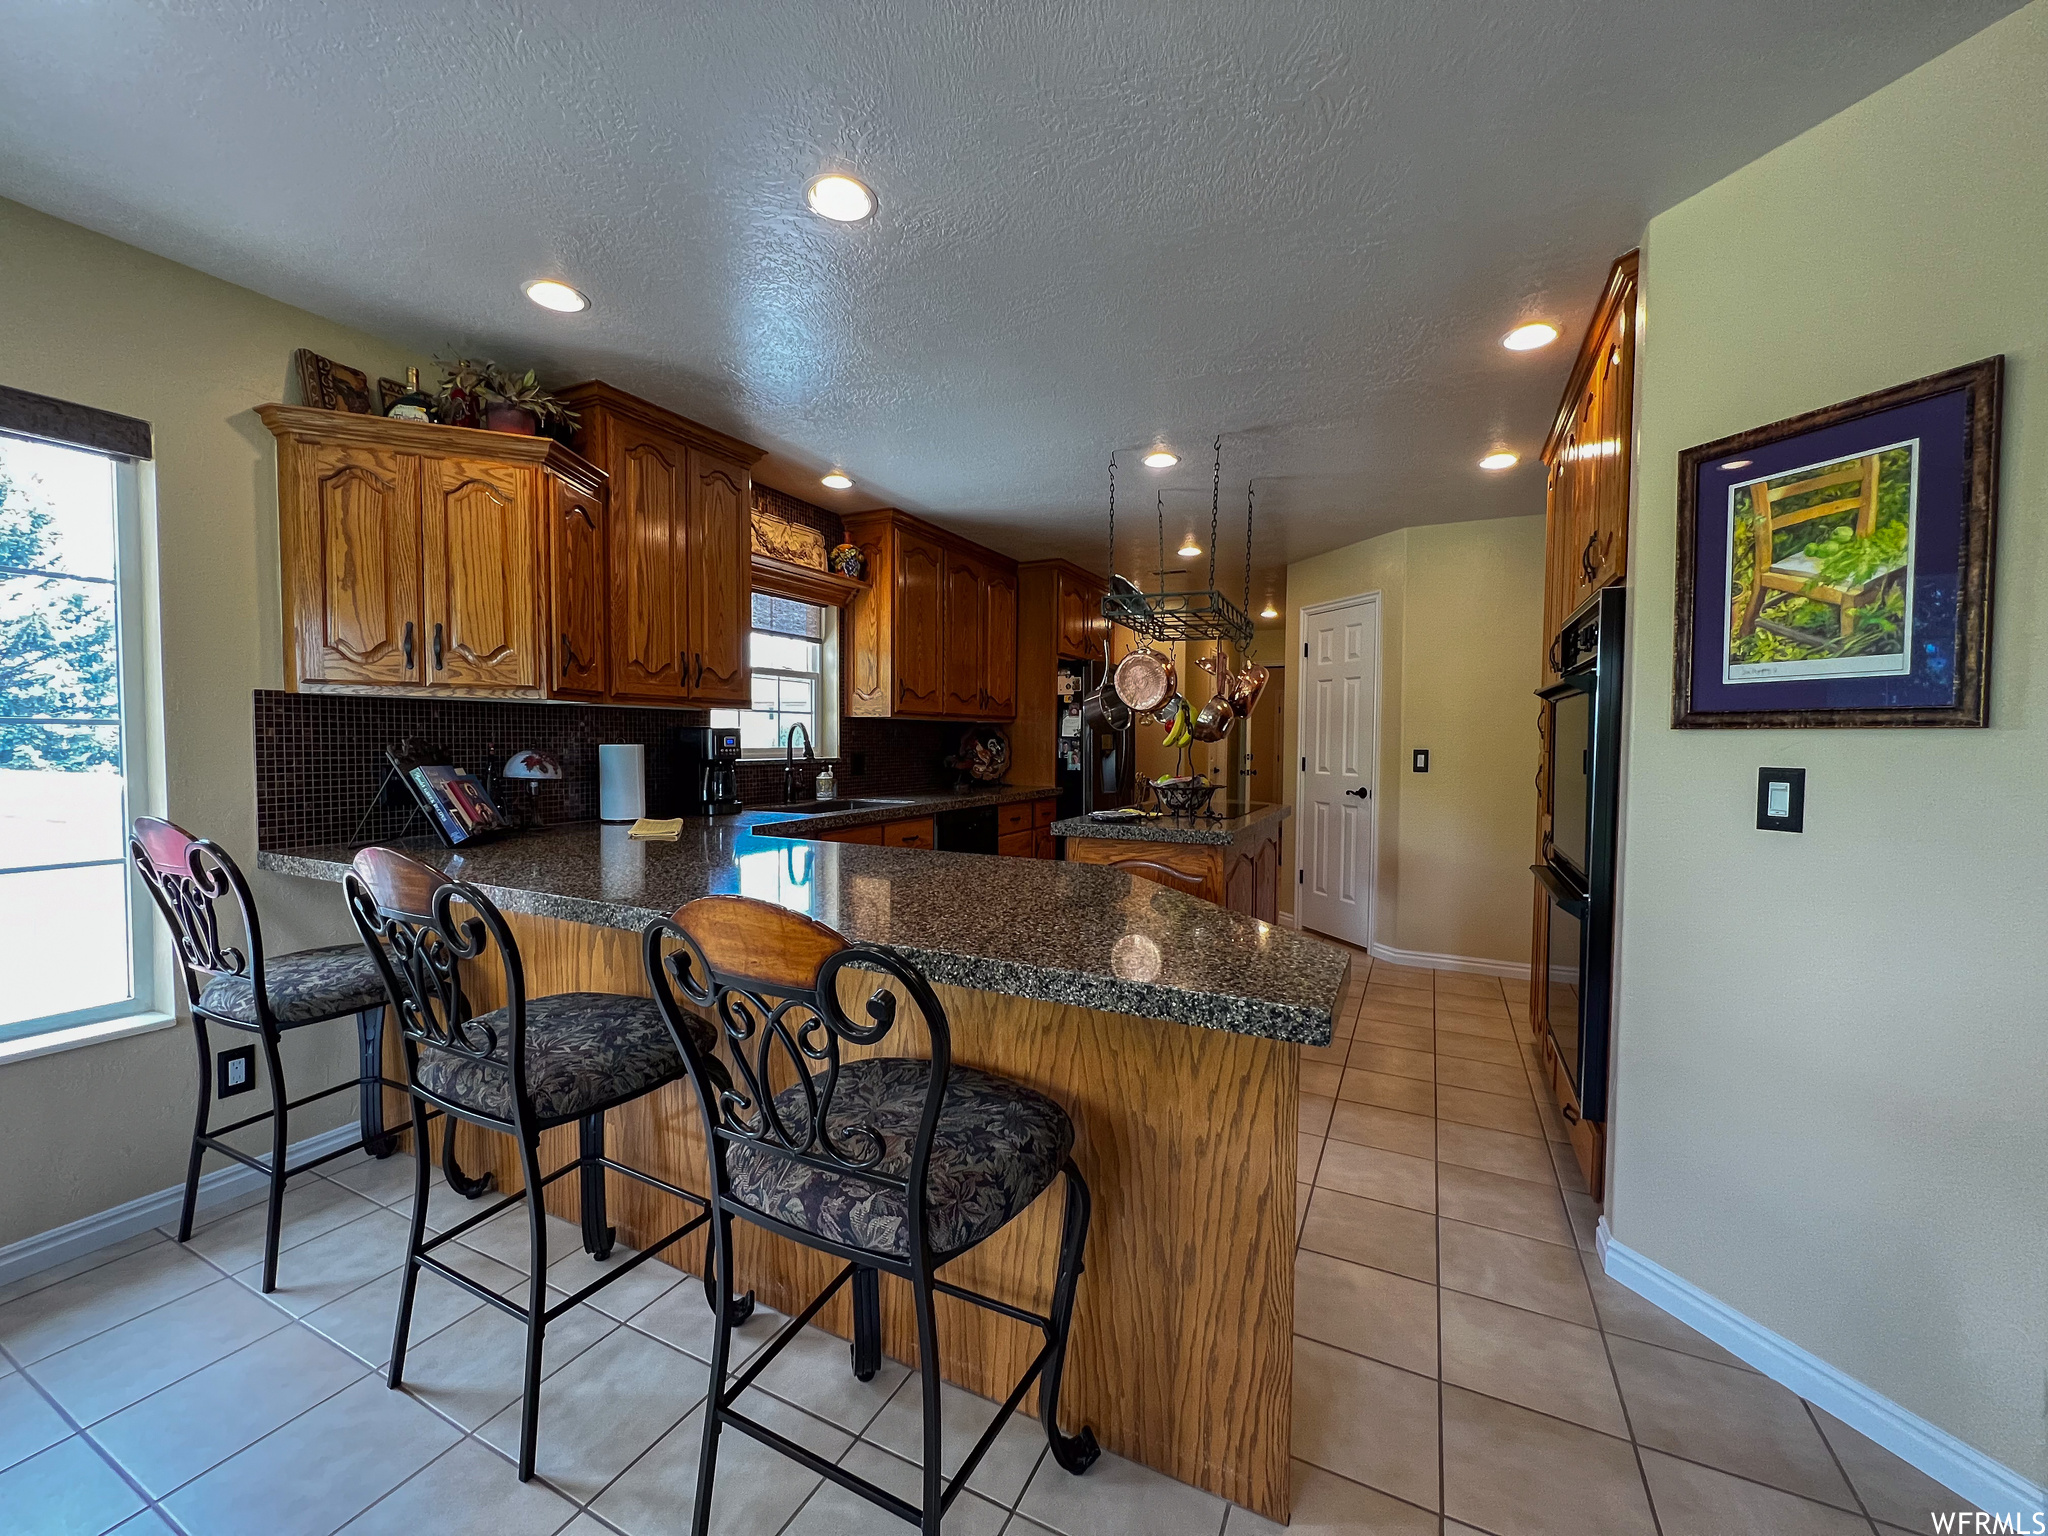 Kitchen featuring natural light, a breakfast bar area, light tile floors, brown cabinets, and dark countertops